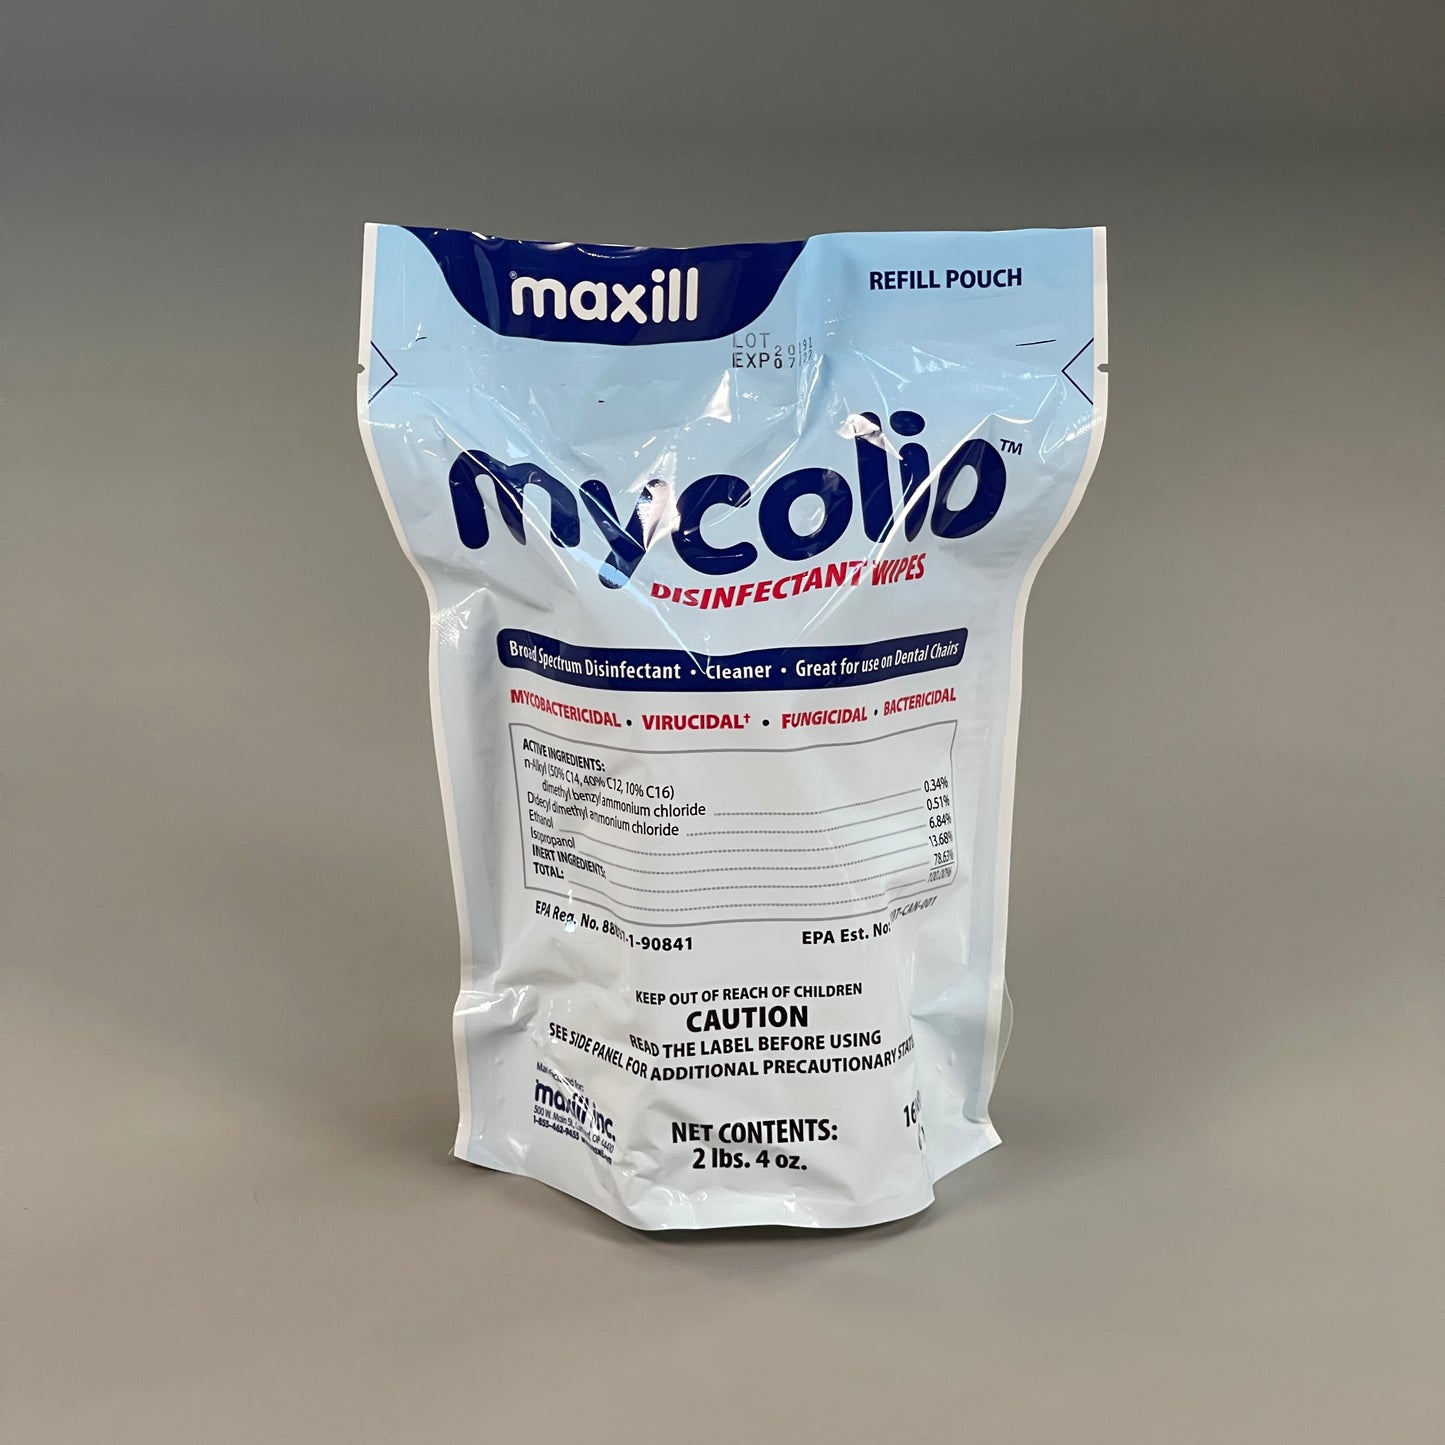 Z@ MYCOLIO (MAXILL) Disinfectant Wipes - CASE OF 8 REFILL BAGS! Expires 07/22 (New)